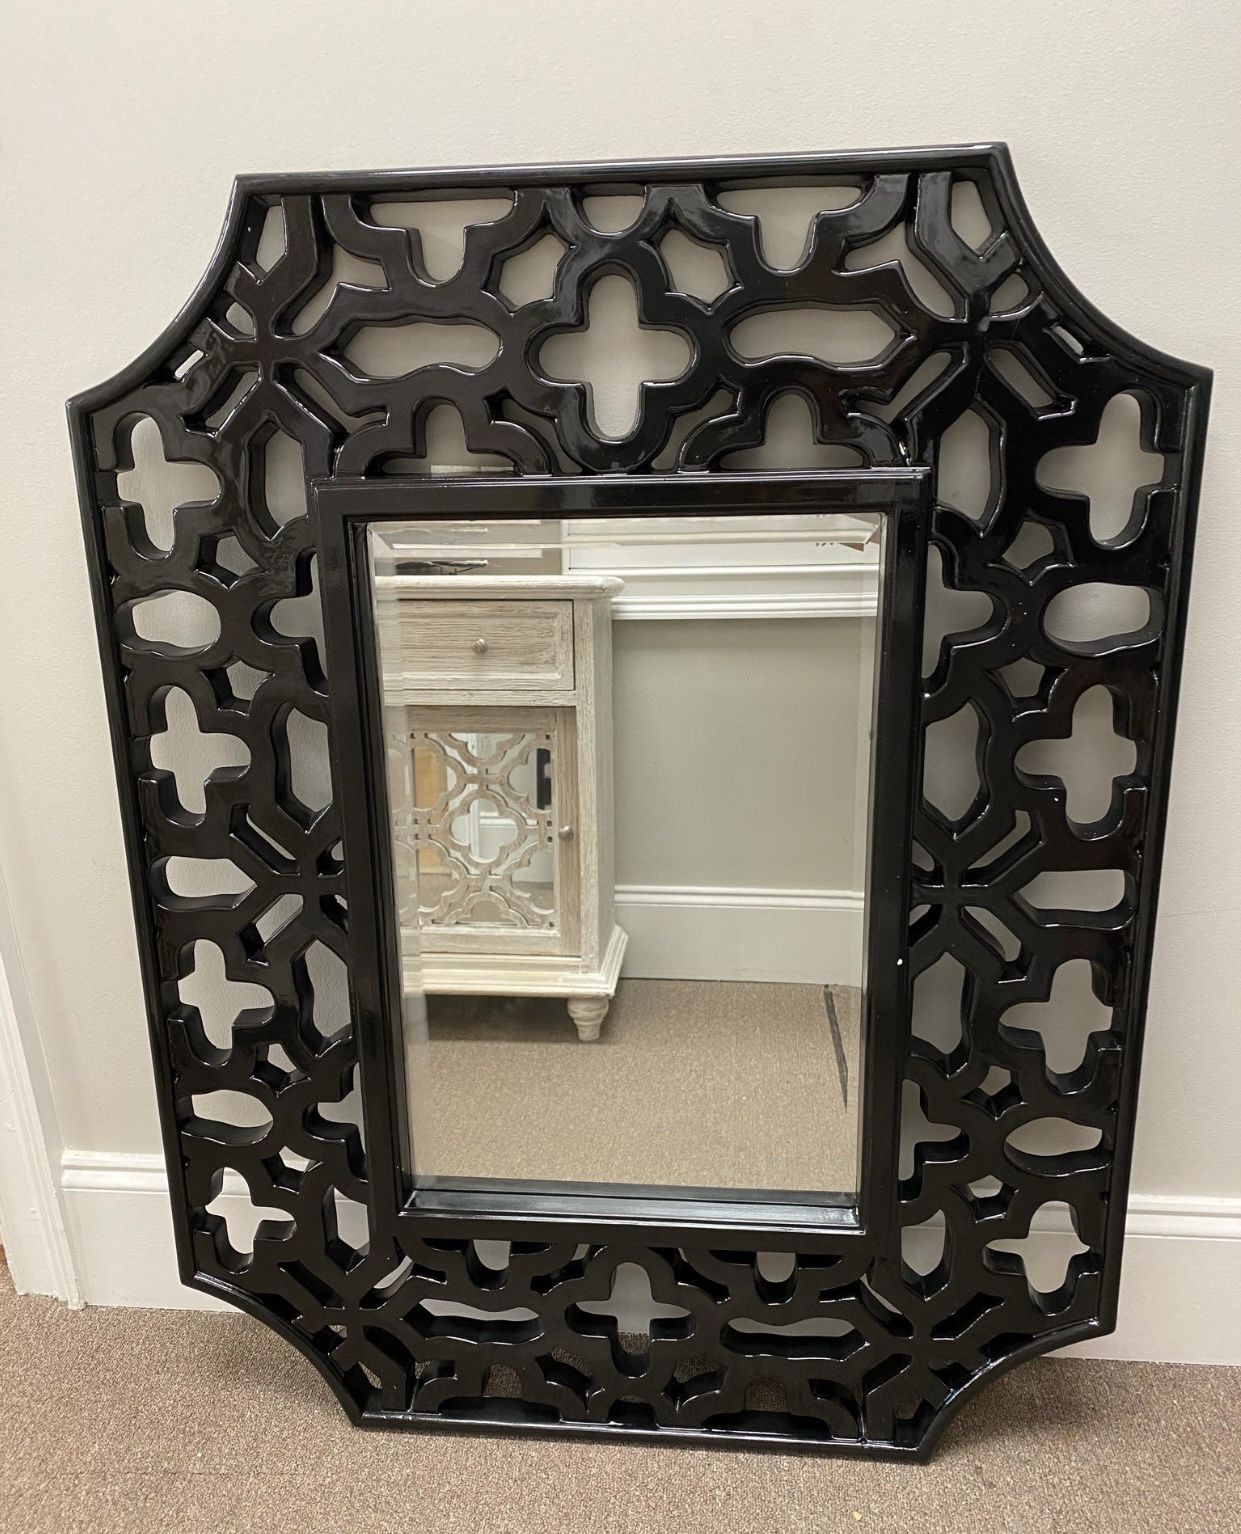 Olivia wall mirror. Overall: 43” H x 33” W x 1.5” D. HAS SMALL CRACK IN FRAME. Wall mounted. Frame design: ornate. Frame material: resin. Finish: blac